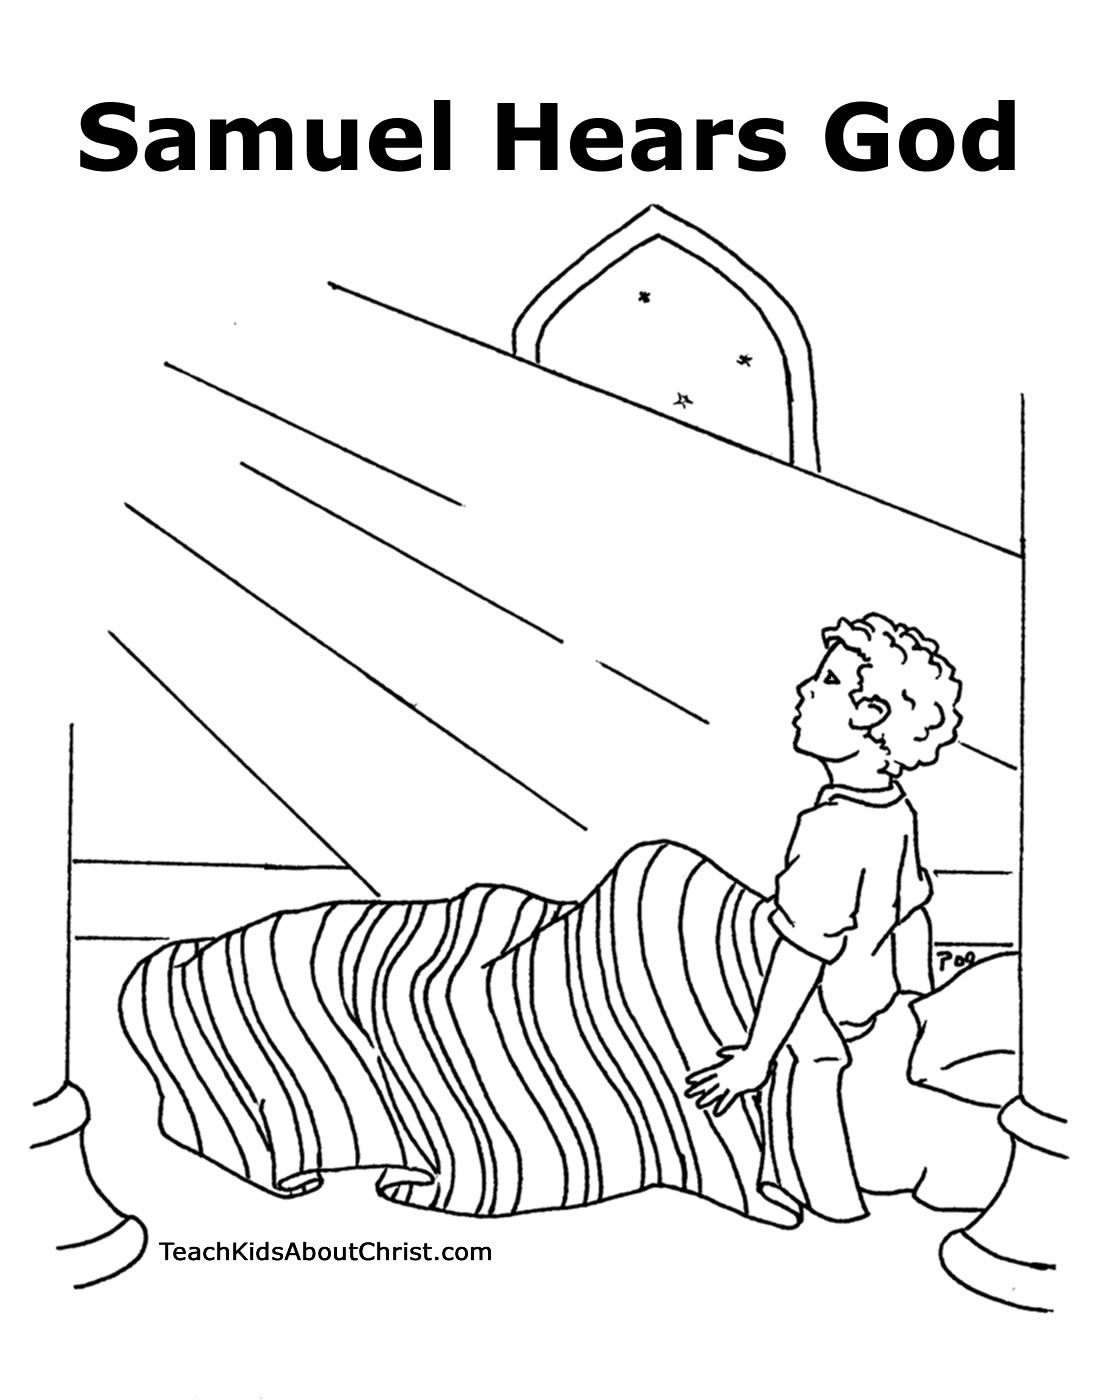 8 Pics of Samuel Sunday School Coloring Pages - The Bible of ...